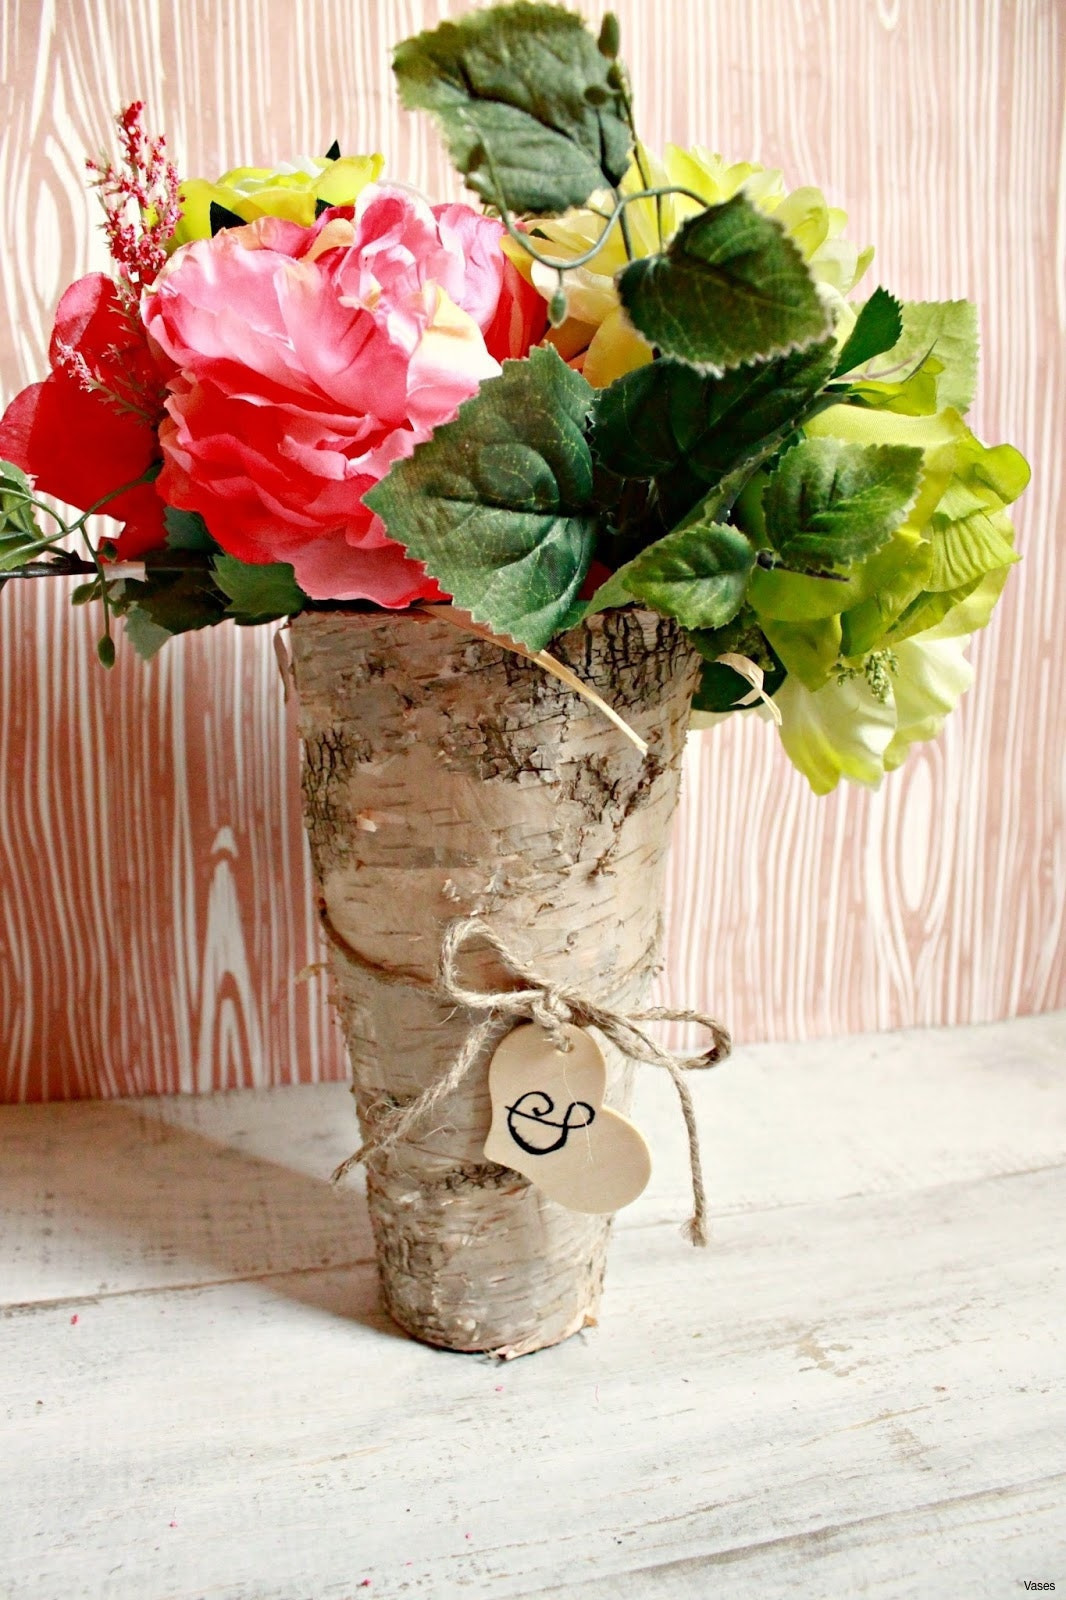 10 Popular Milk Vases for Centerpieces 2022 free download milk vases for centerpieces of rose gold vases photos flowers and decorations for weddings h vases in flowers and decorations for weddings h vases diy wood vase i 0d base